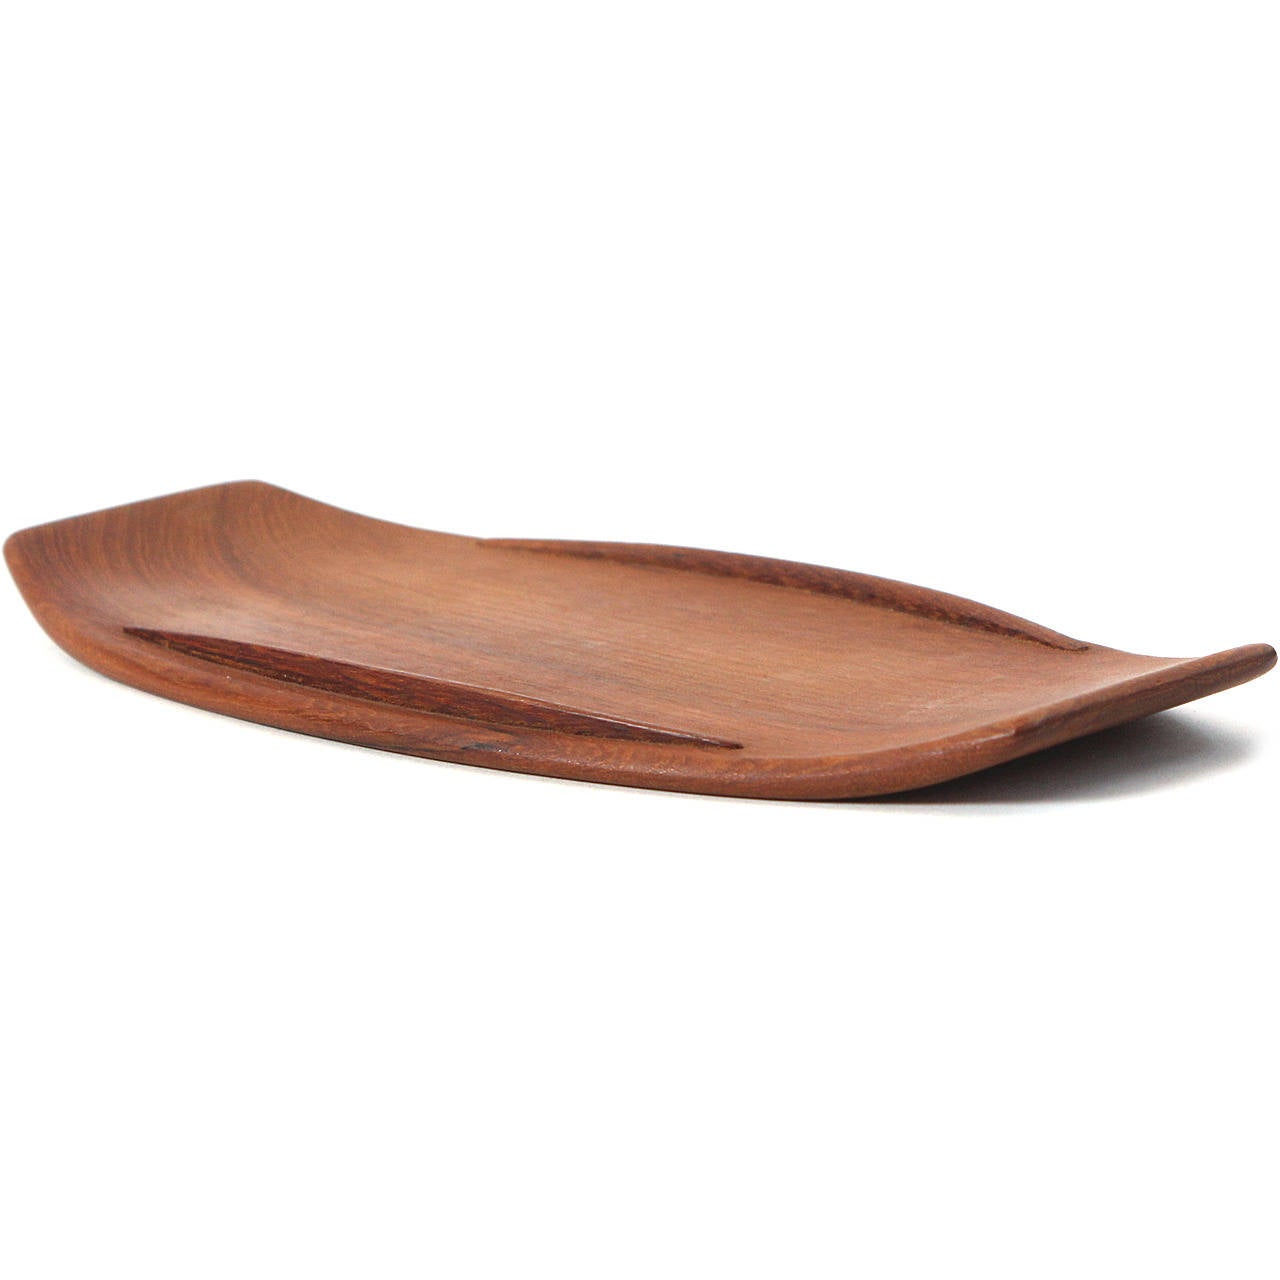 Possibly a unique prototype, this oblong railed tray with upturned ends beautifully crafted of warm-toned solid teak is half the size of the later staved production version produced by Dansk.